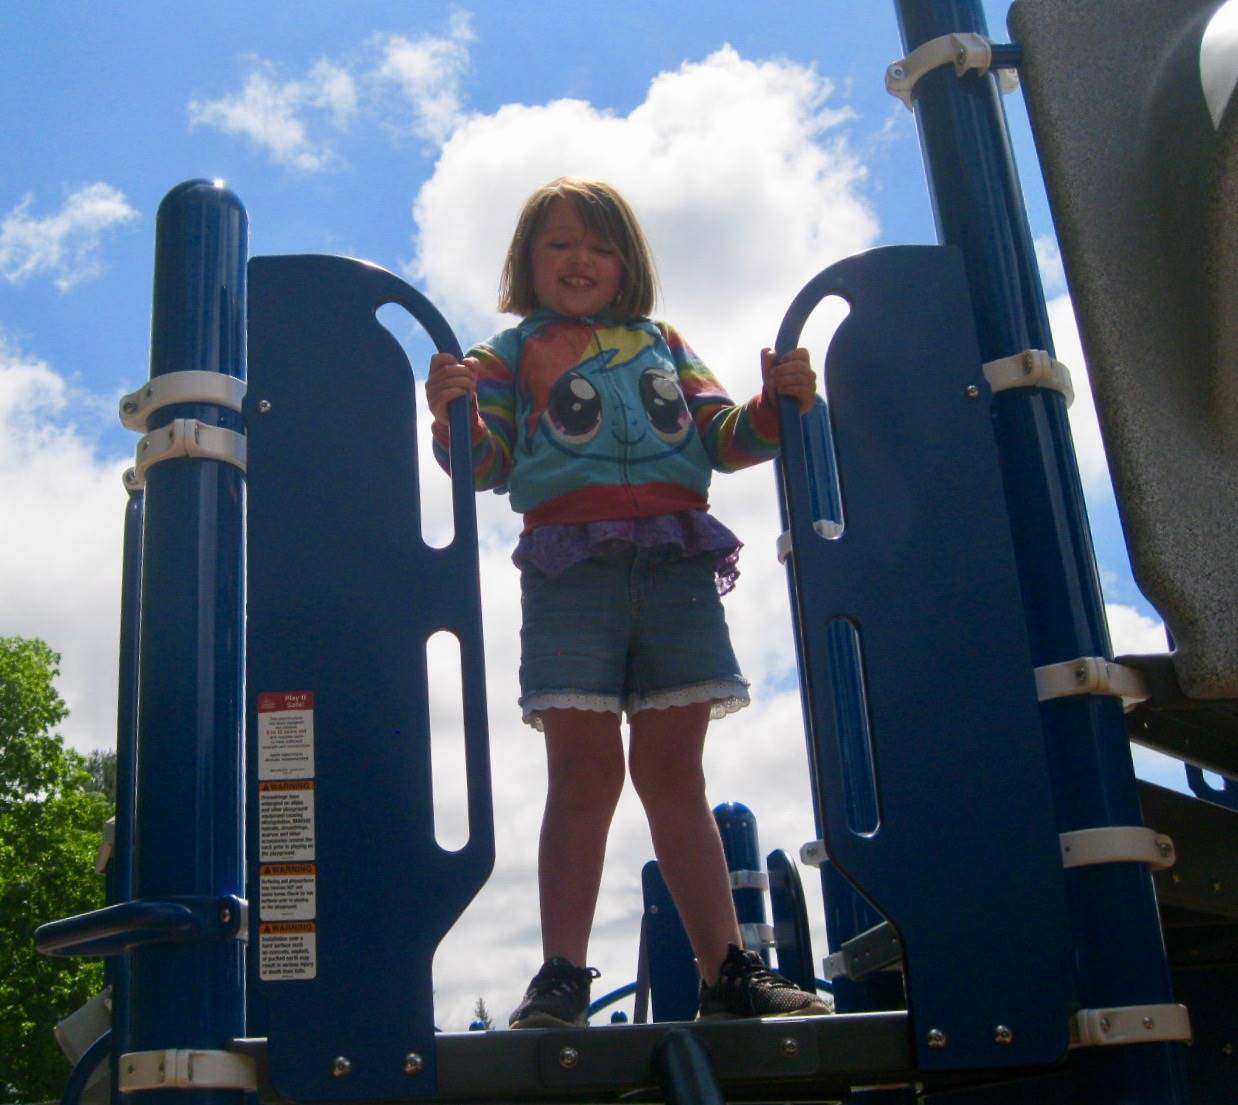 A student plays on playground.